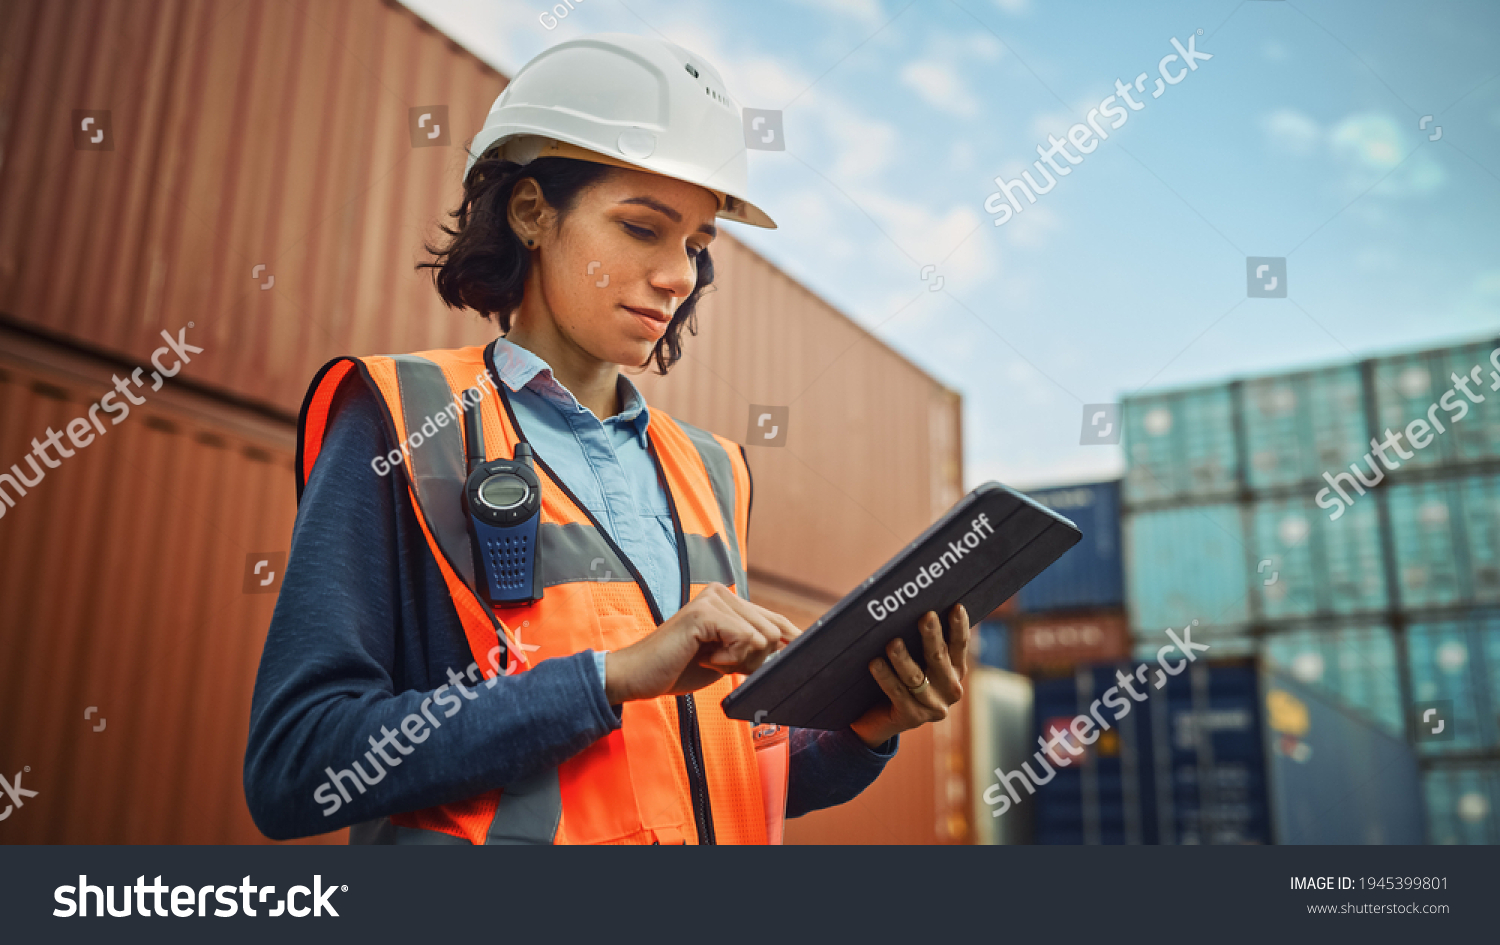 Smiling Portrait of a Beautiful Latin Female Industrial Engineer in White Hard Hat, High-Visibility Vest Working on Tablet Computer. Inspector or Safety Supervisor in Container Terminal. #1945399801